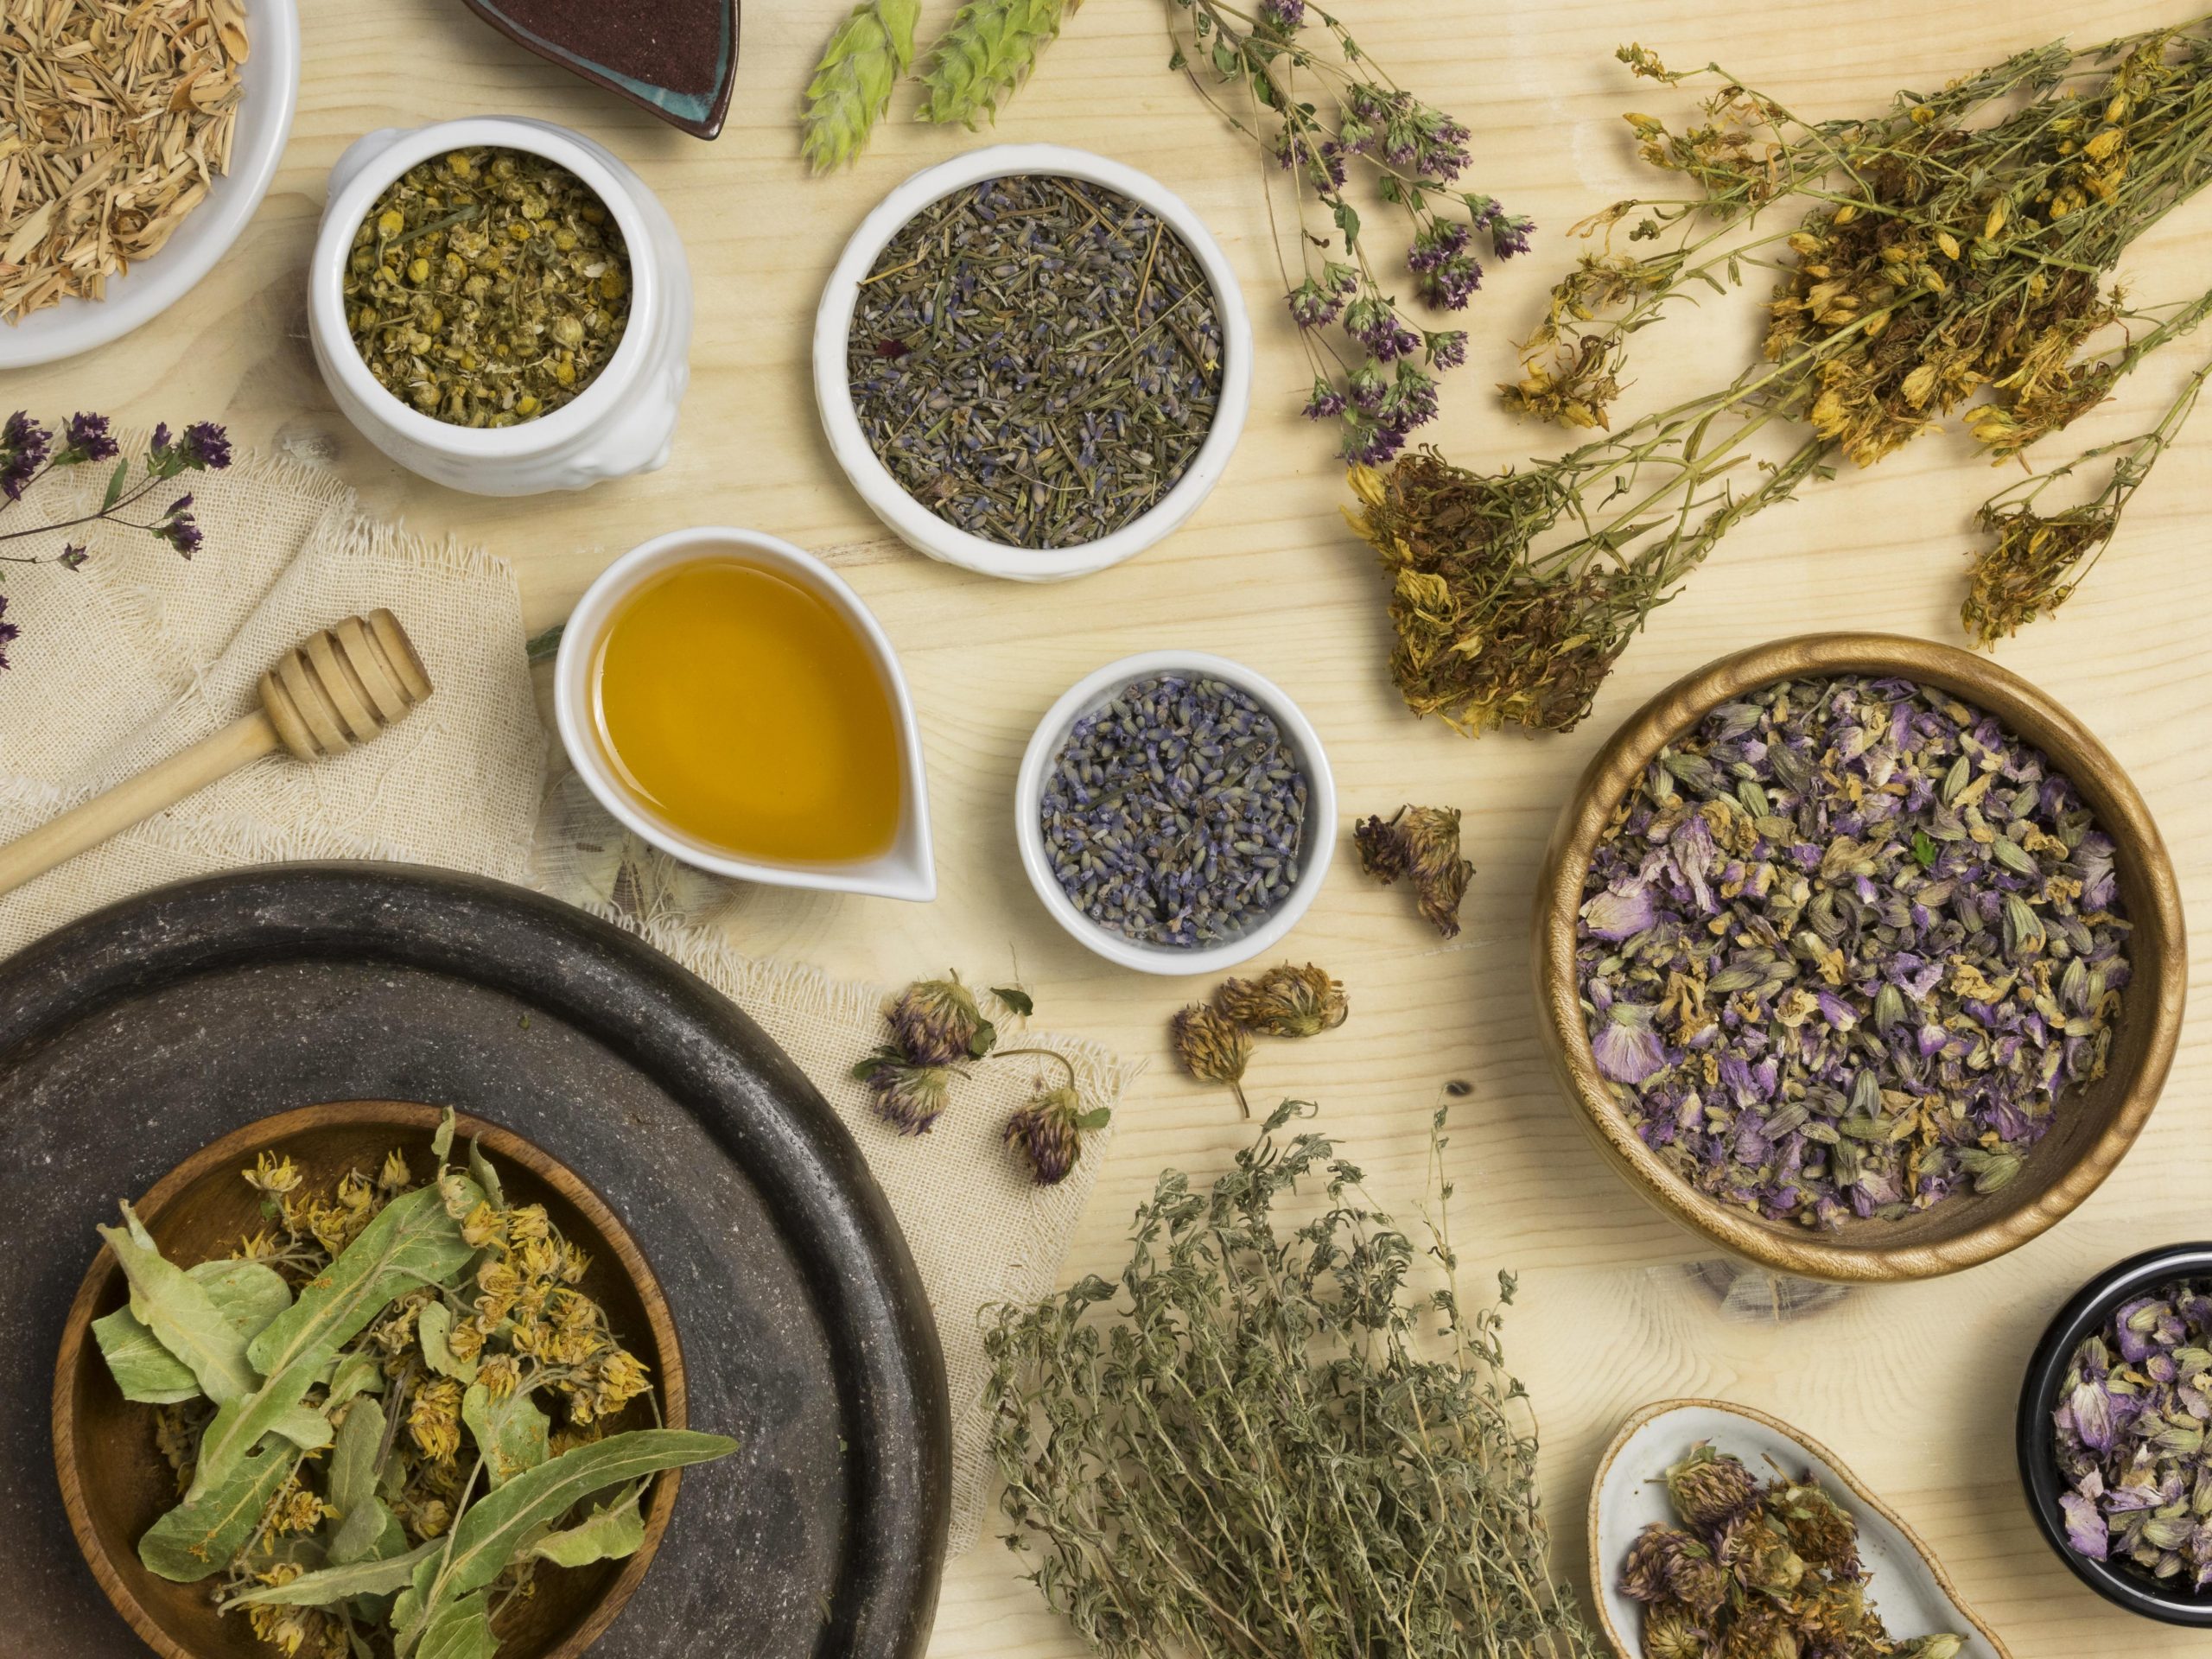 Herbal Plants: 7 Medicinal Plants With Powerful Healing Benefits